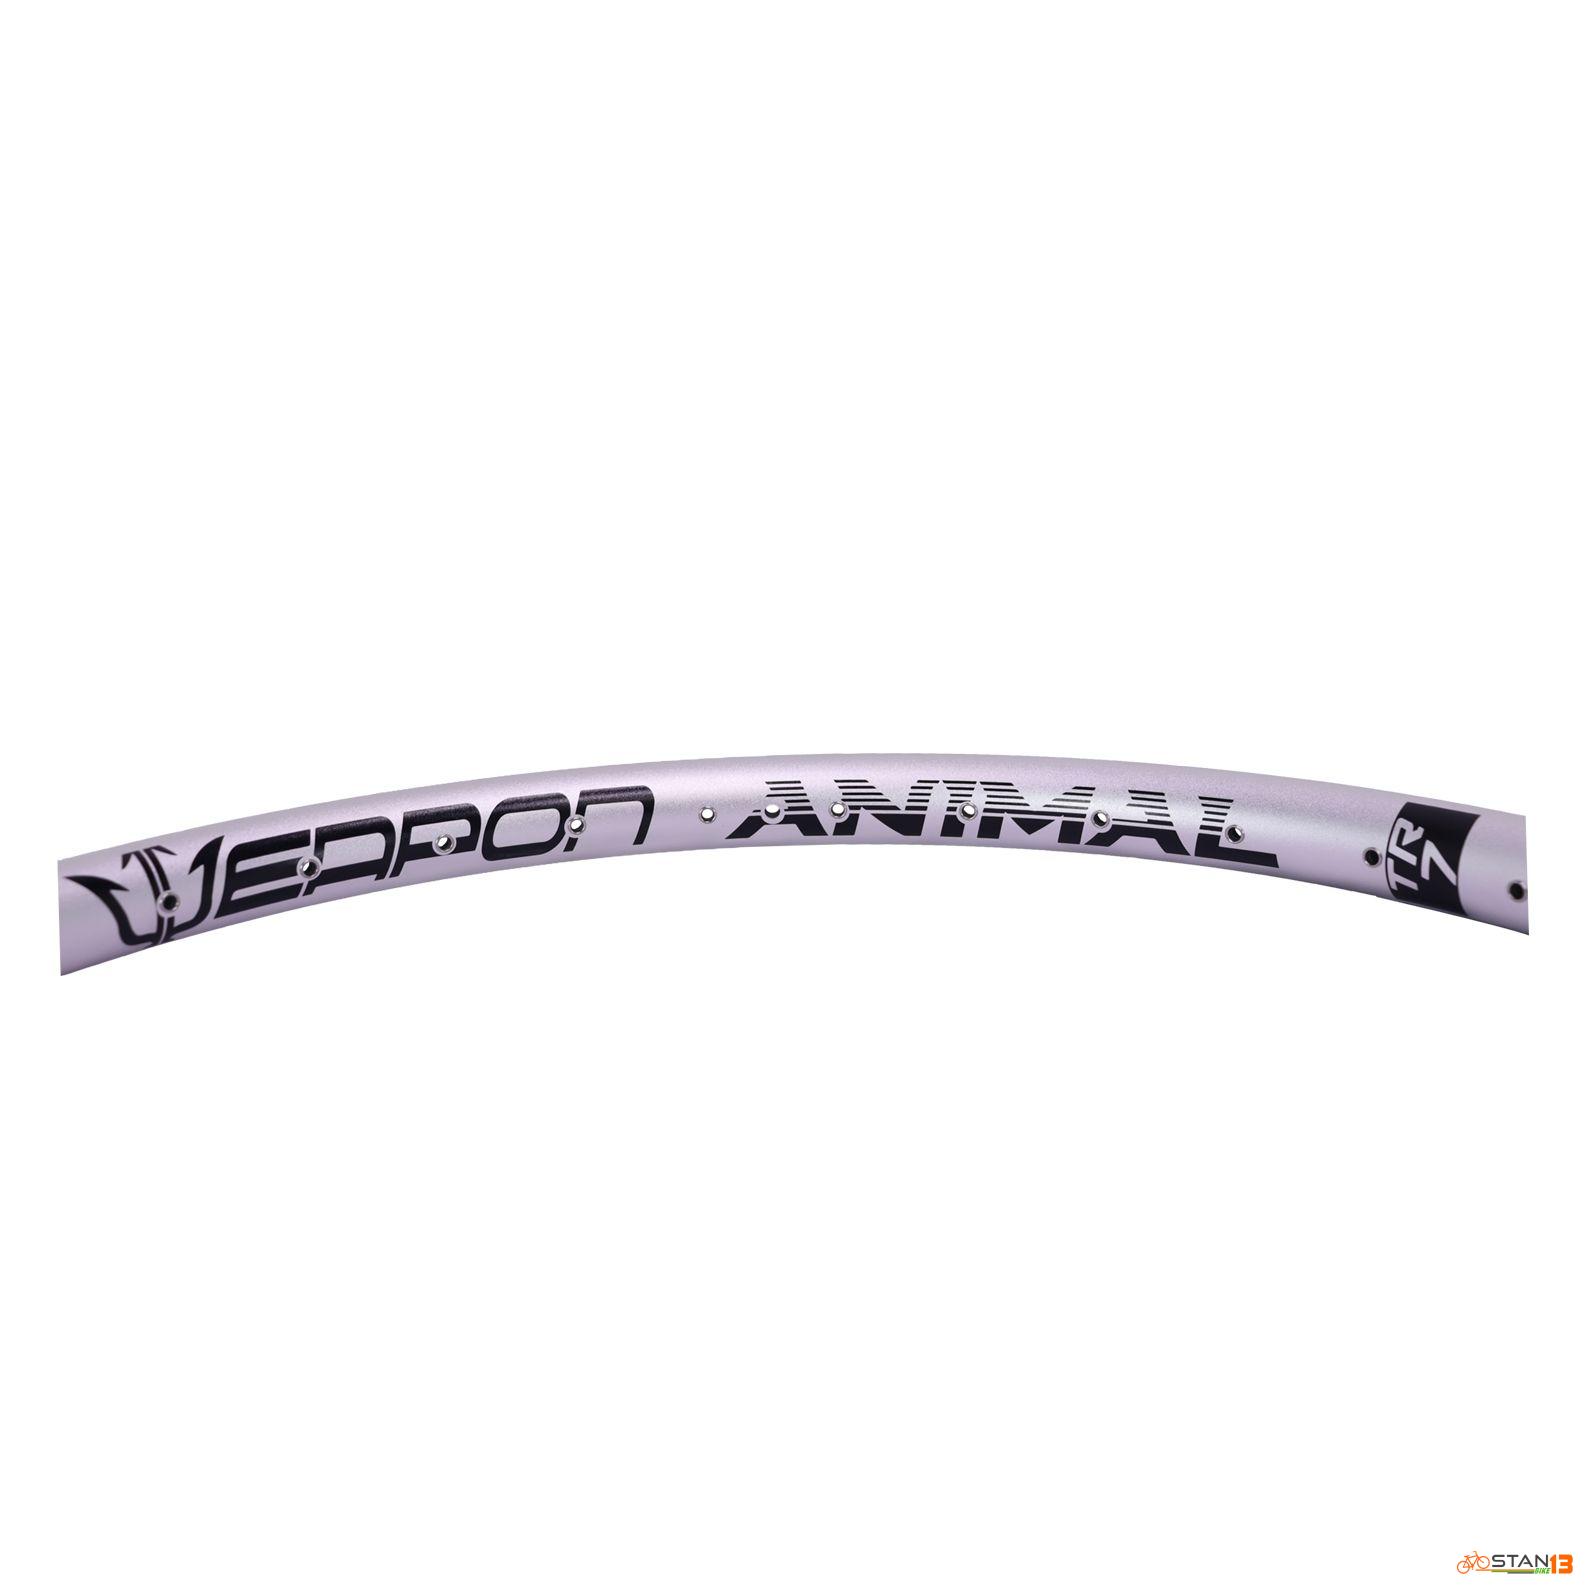 Rim Weapon Animal TR7 27.5 Enduro SUPER STRONG RIMS 40mm Outer